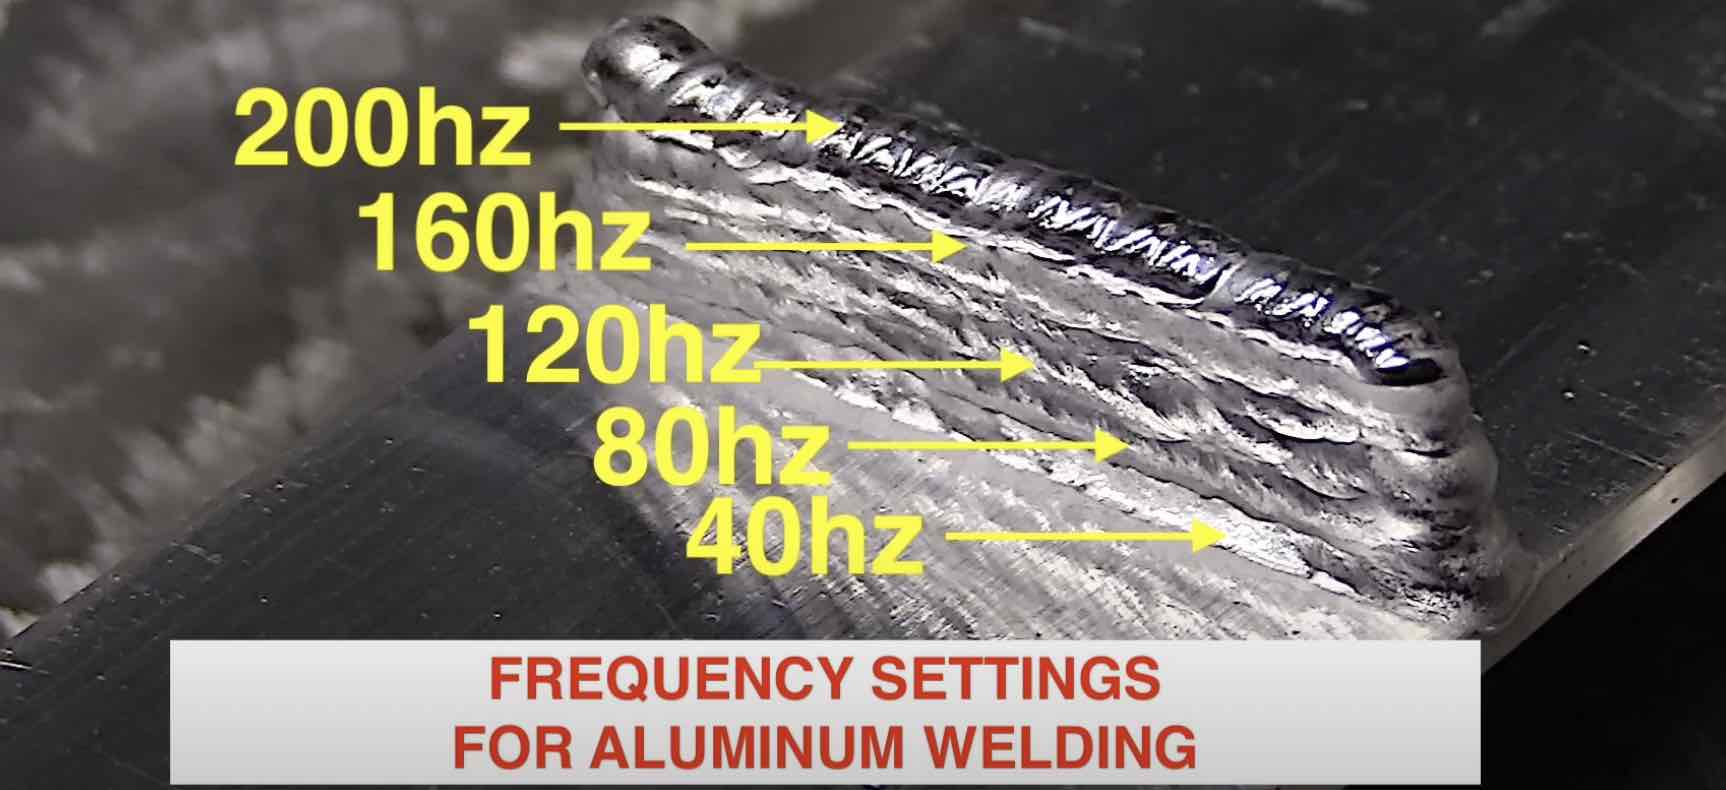 ac frequency settings for aluminum tig welding